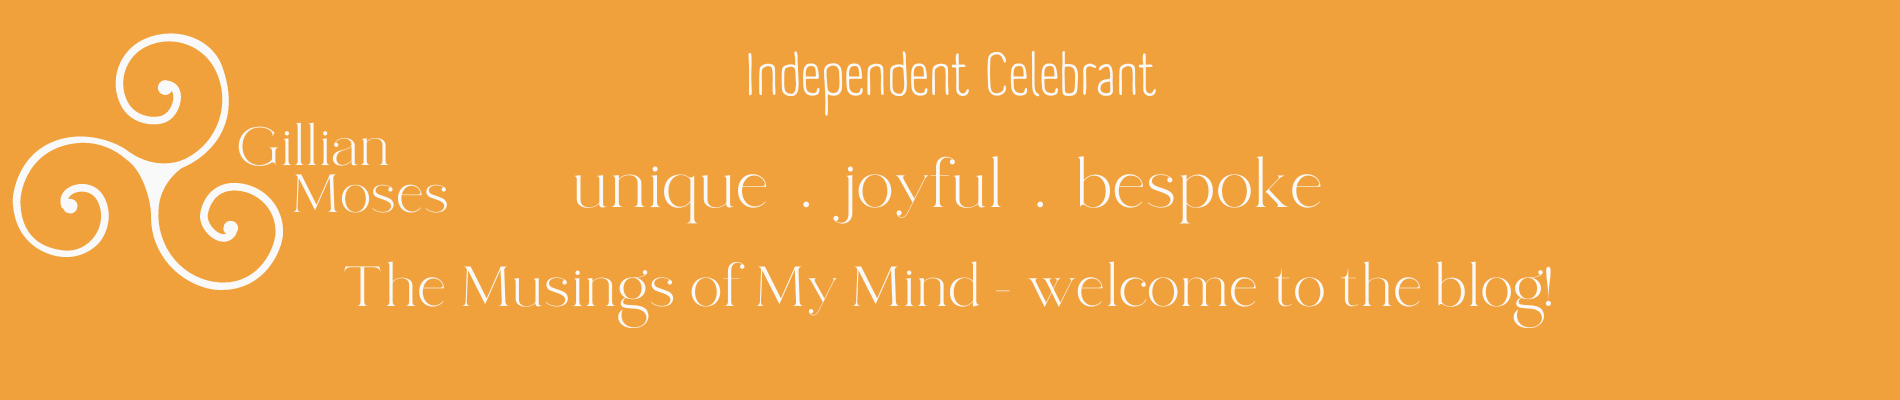 Gillian Moses Independent Celebrant Welcome to the musings of my mind - the blog